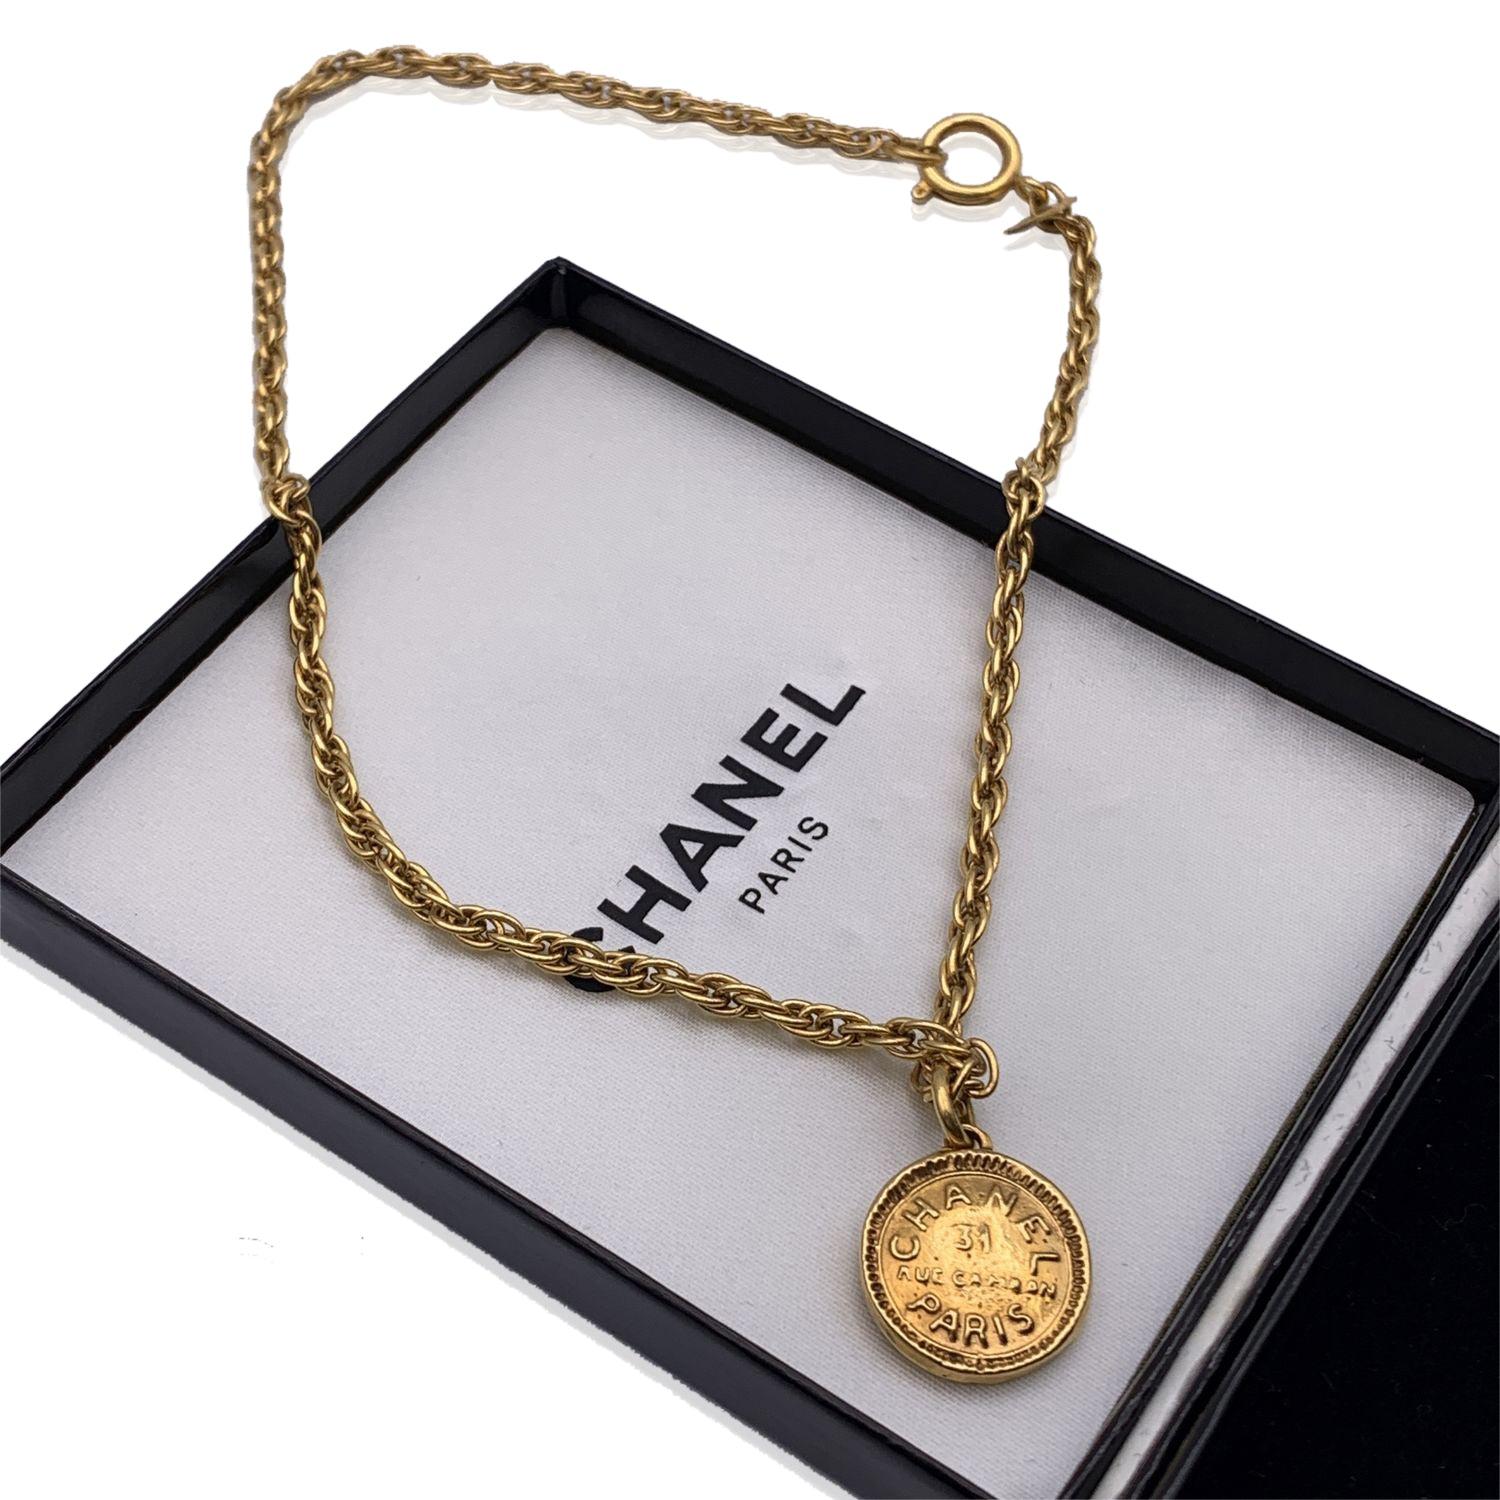 Vintage gold metal chain necklace and round 'Chanel 31 Rue Cambon Paris' medallion pendant. Spring ring closure. Necklace's length 16 inches - 40.6 cm. 'CHANEL - CC - Made in France' oval tab on the pendant Condition A - EXCELLENT Gently used.